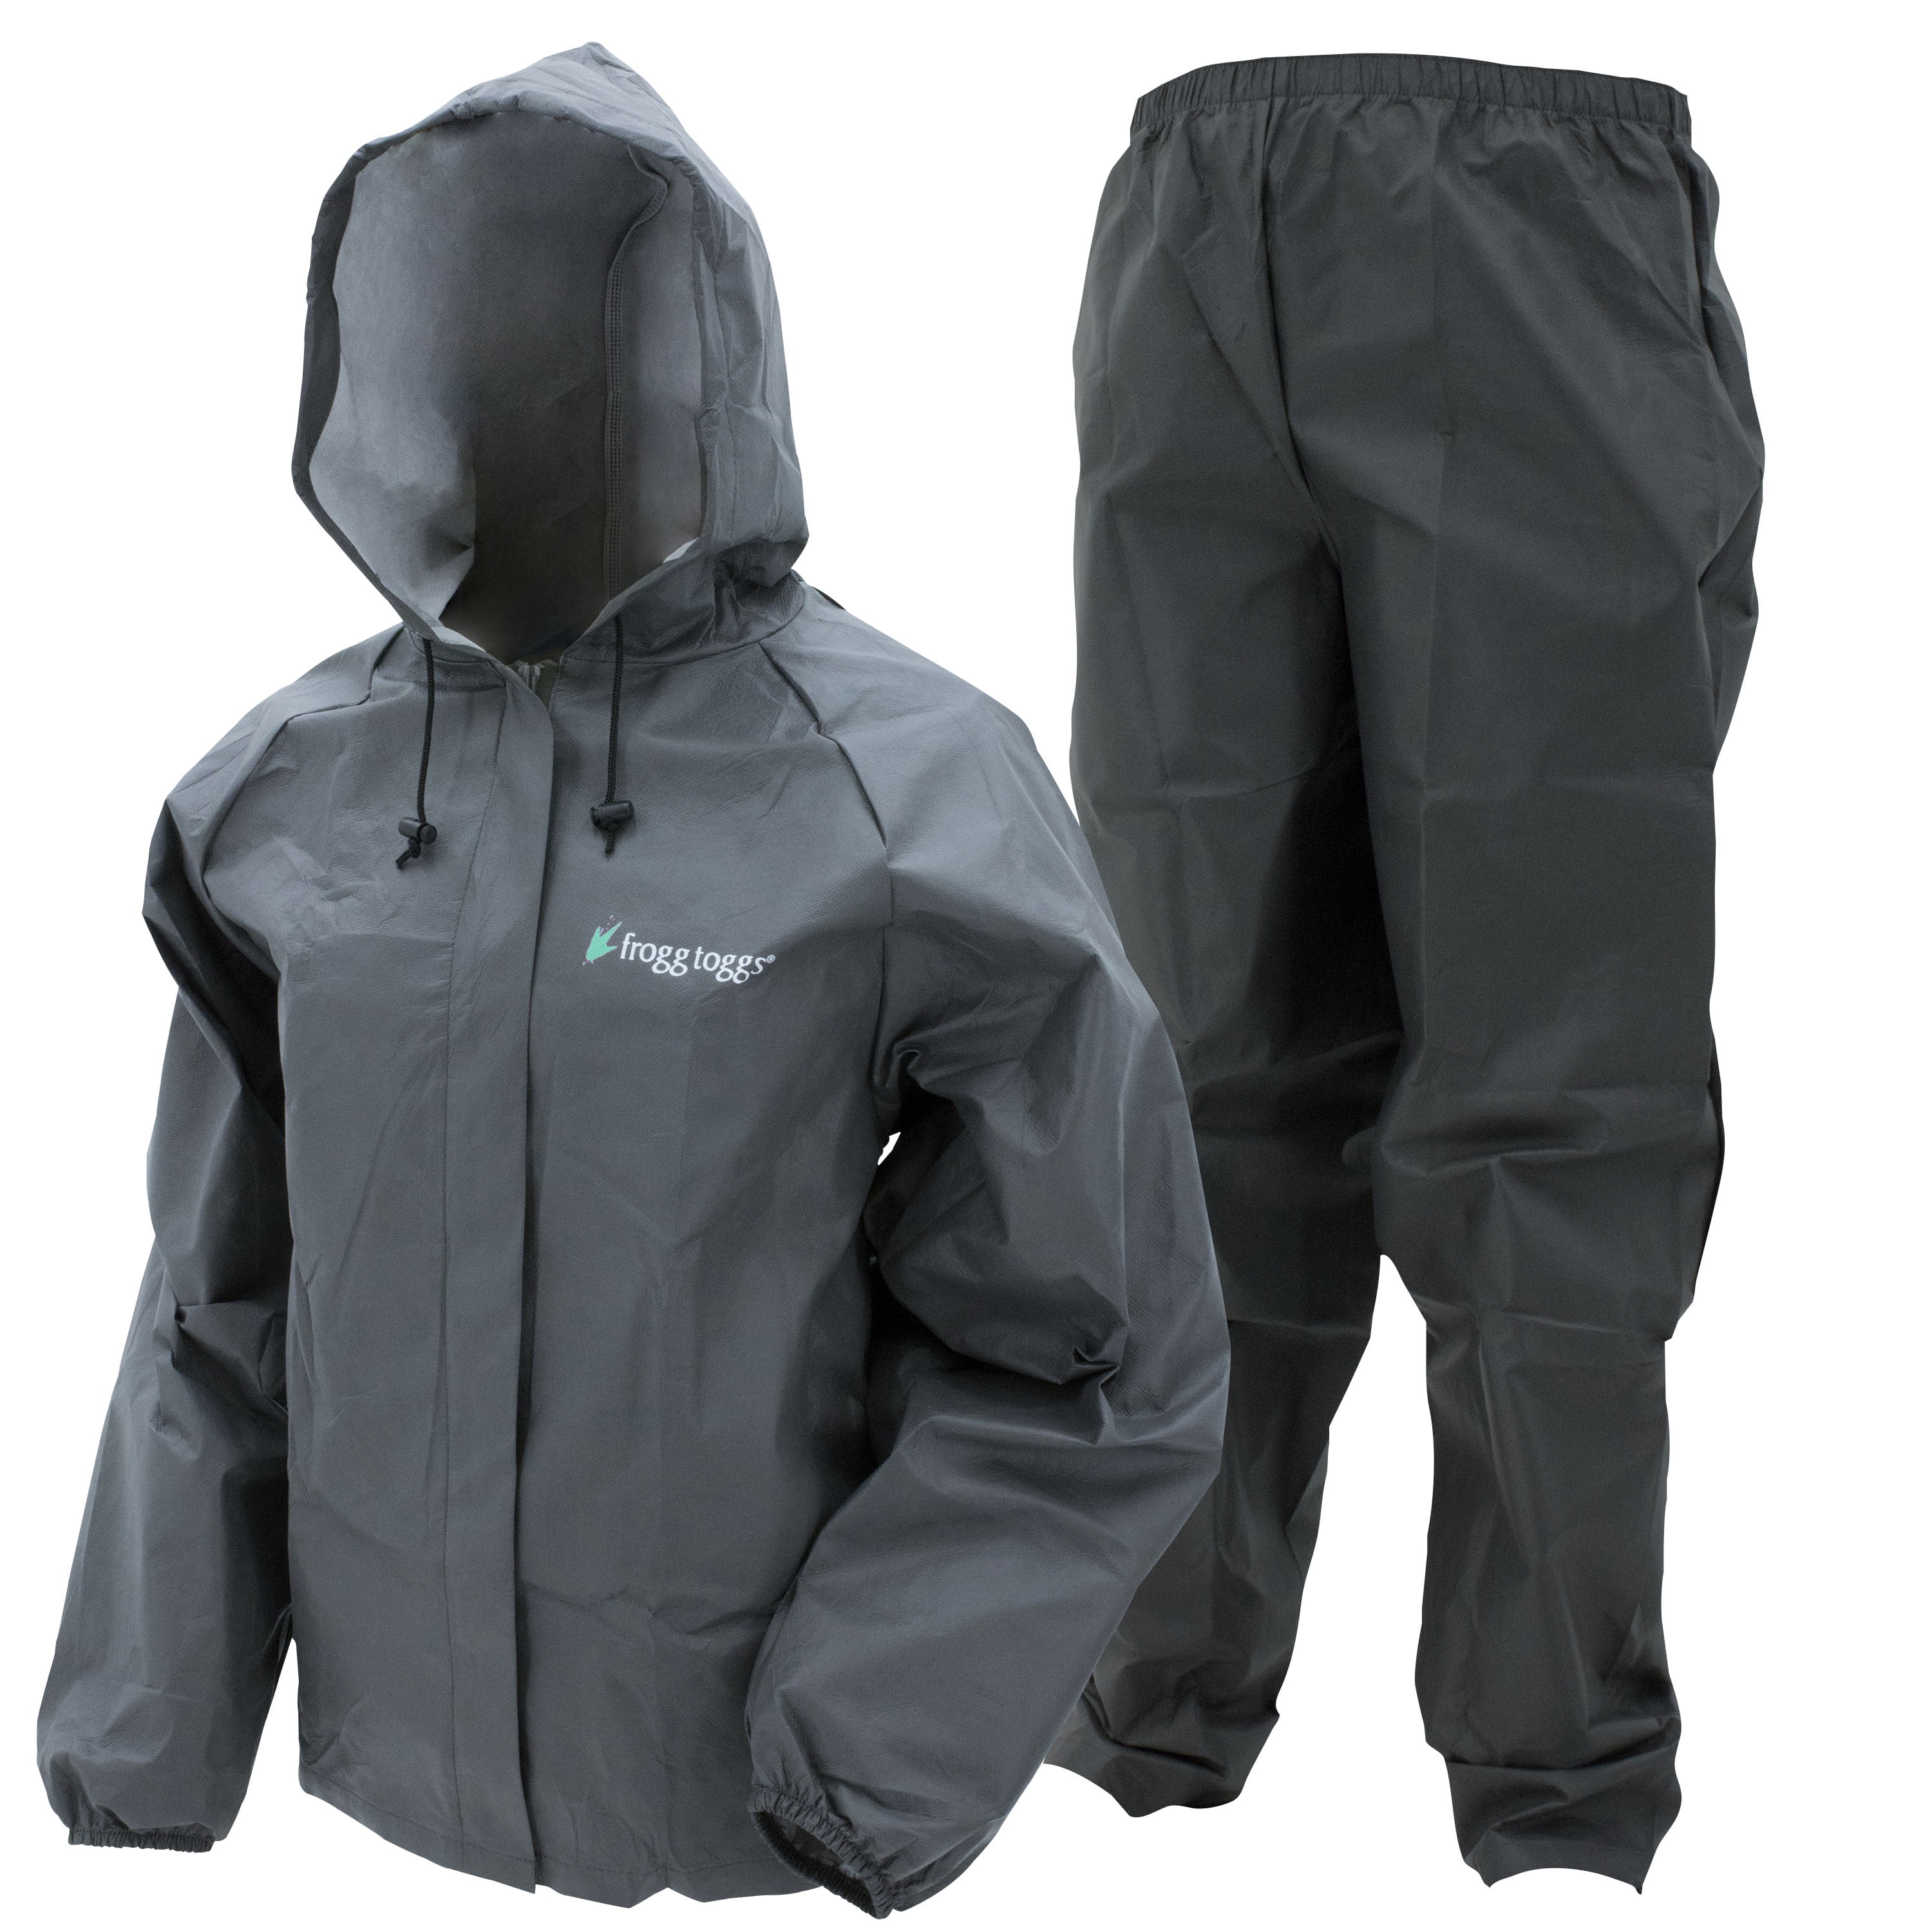 Frogg Toggs Ultralite2 Rain Suit Size Small Green Ul1204-09 for sale online 